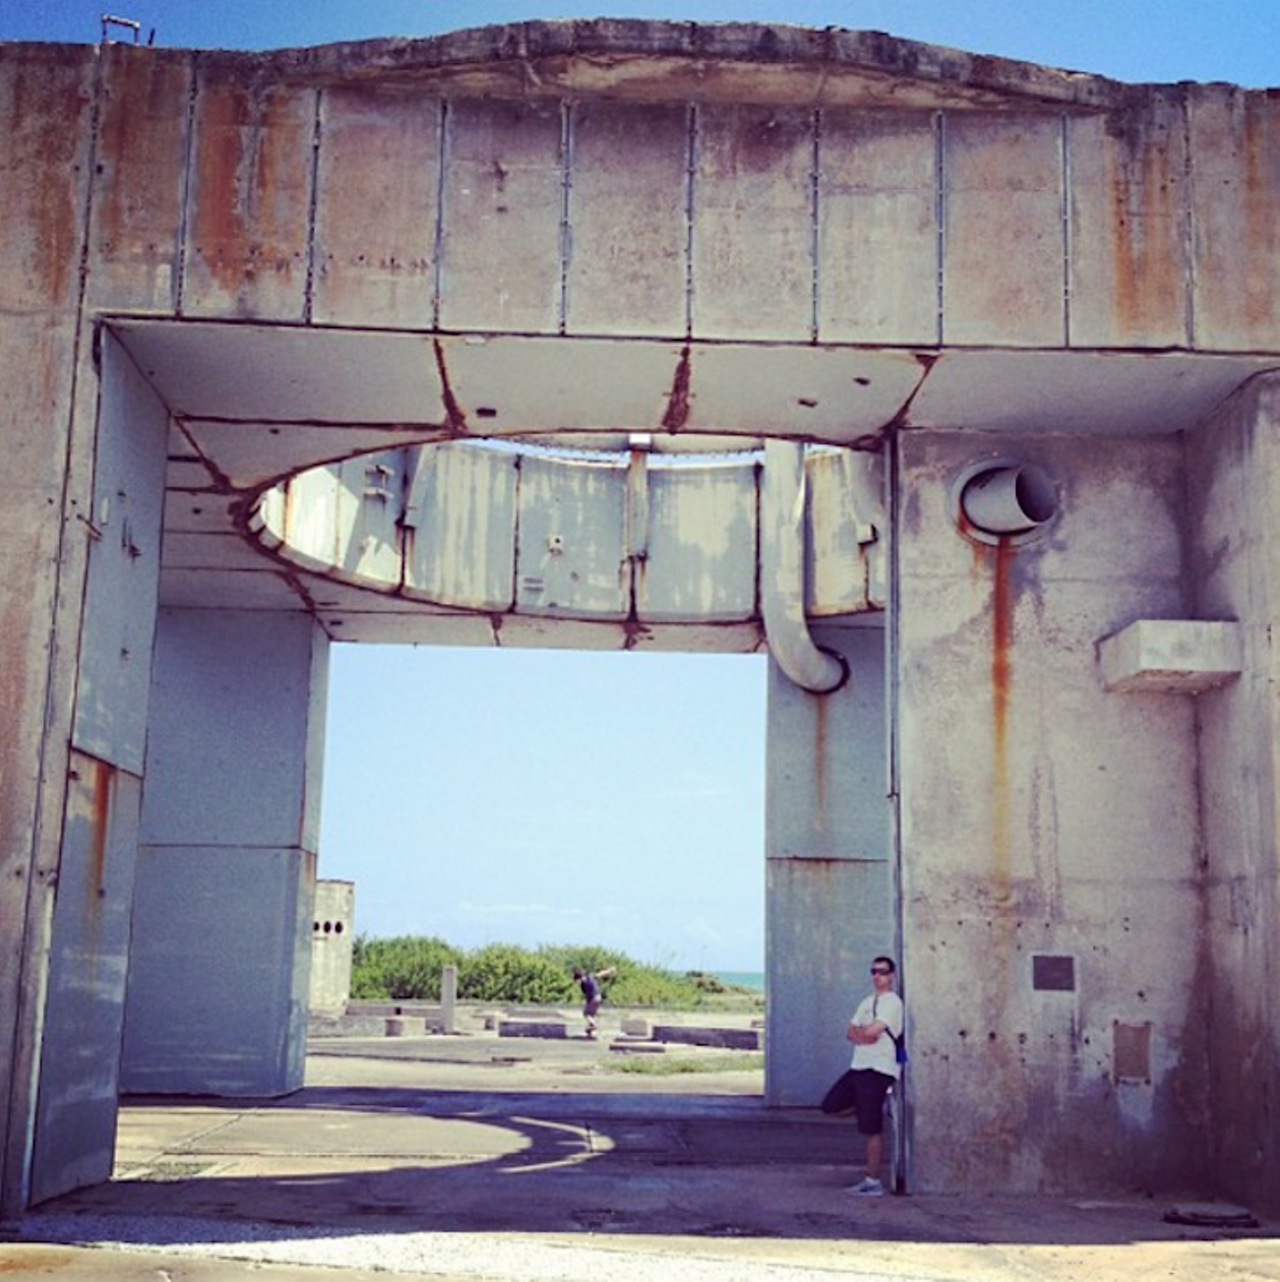 Apollo 1 Launch Complex 34
Cape Canaveral
In 1967 the Apollo 1 craft caught fire, killing all three men aboard. Since then, the three astronauts have been rumored to haunt the launch site. Visitors to the site have reported hearing loud screams from the launch pad, and feeling an overwhelming sense of fear and sadness. 
Photo via brrydeepolefit/Instagram